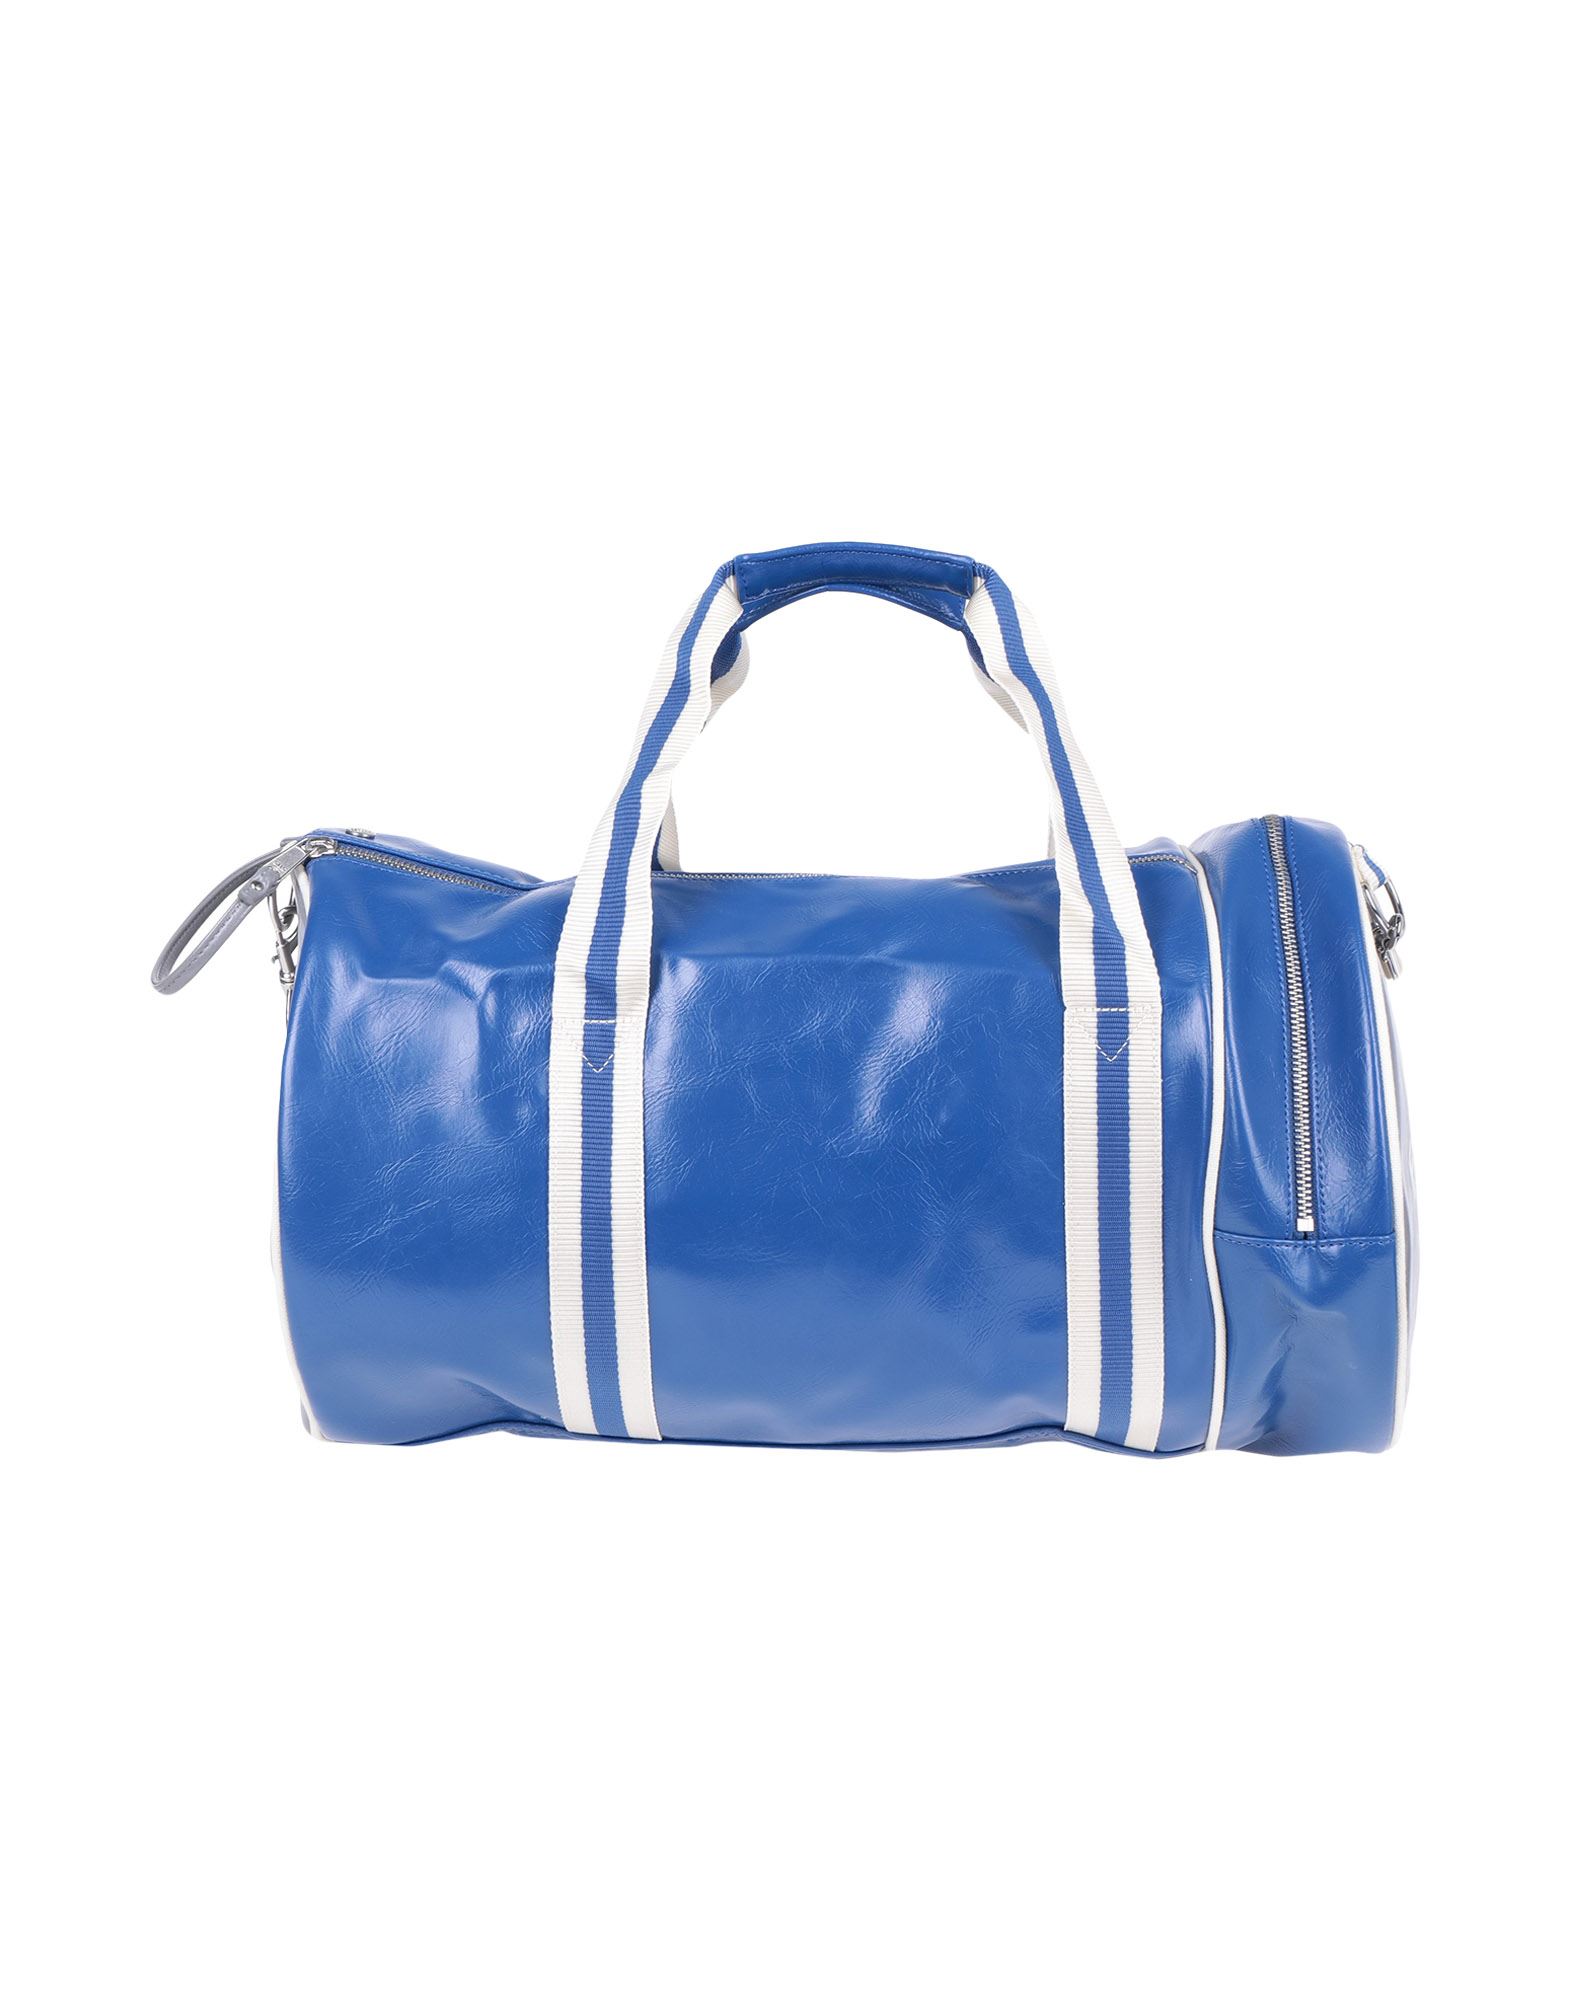 FRED PERRY Travel duffel bags - Item 55015742